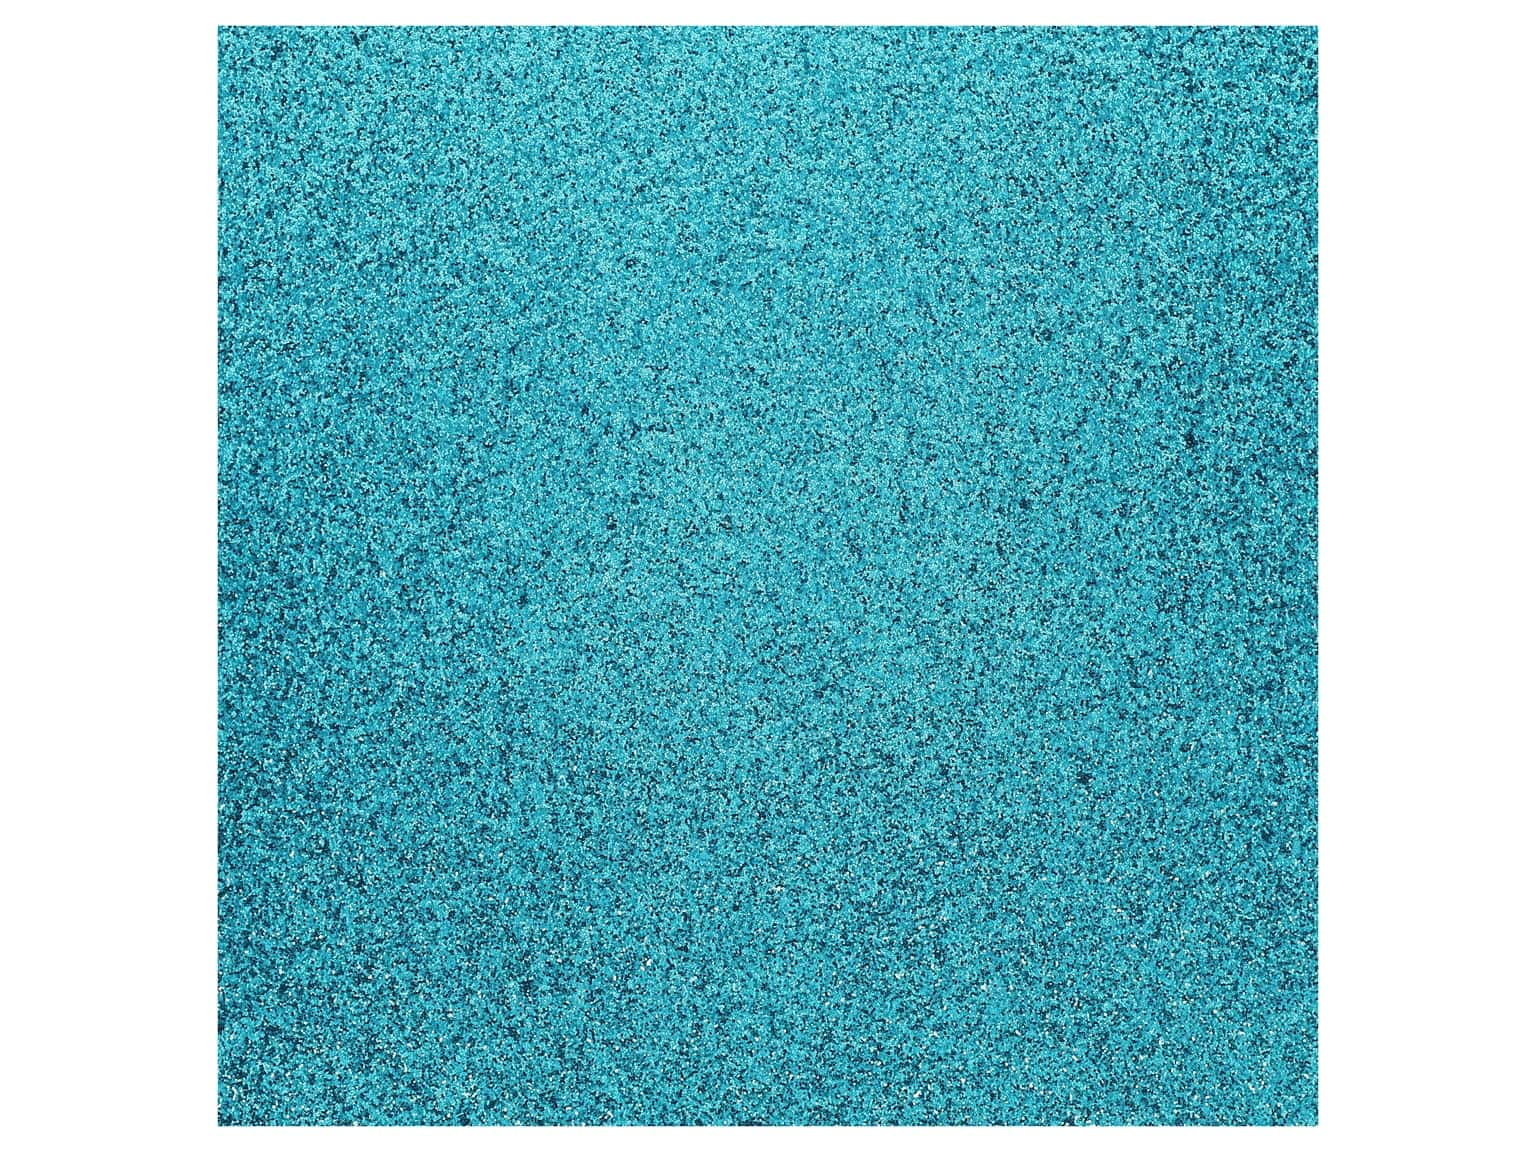 American Crafts 12 x 12 in. Cardstock Duotone Glitter Charcoal